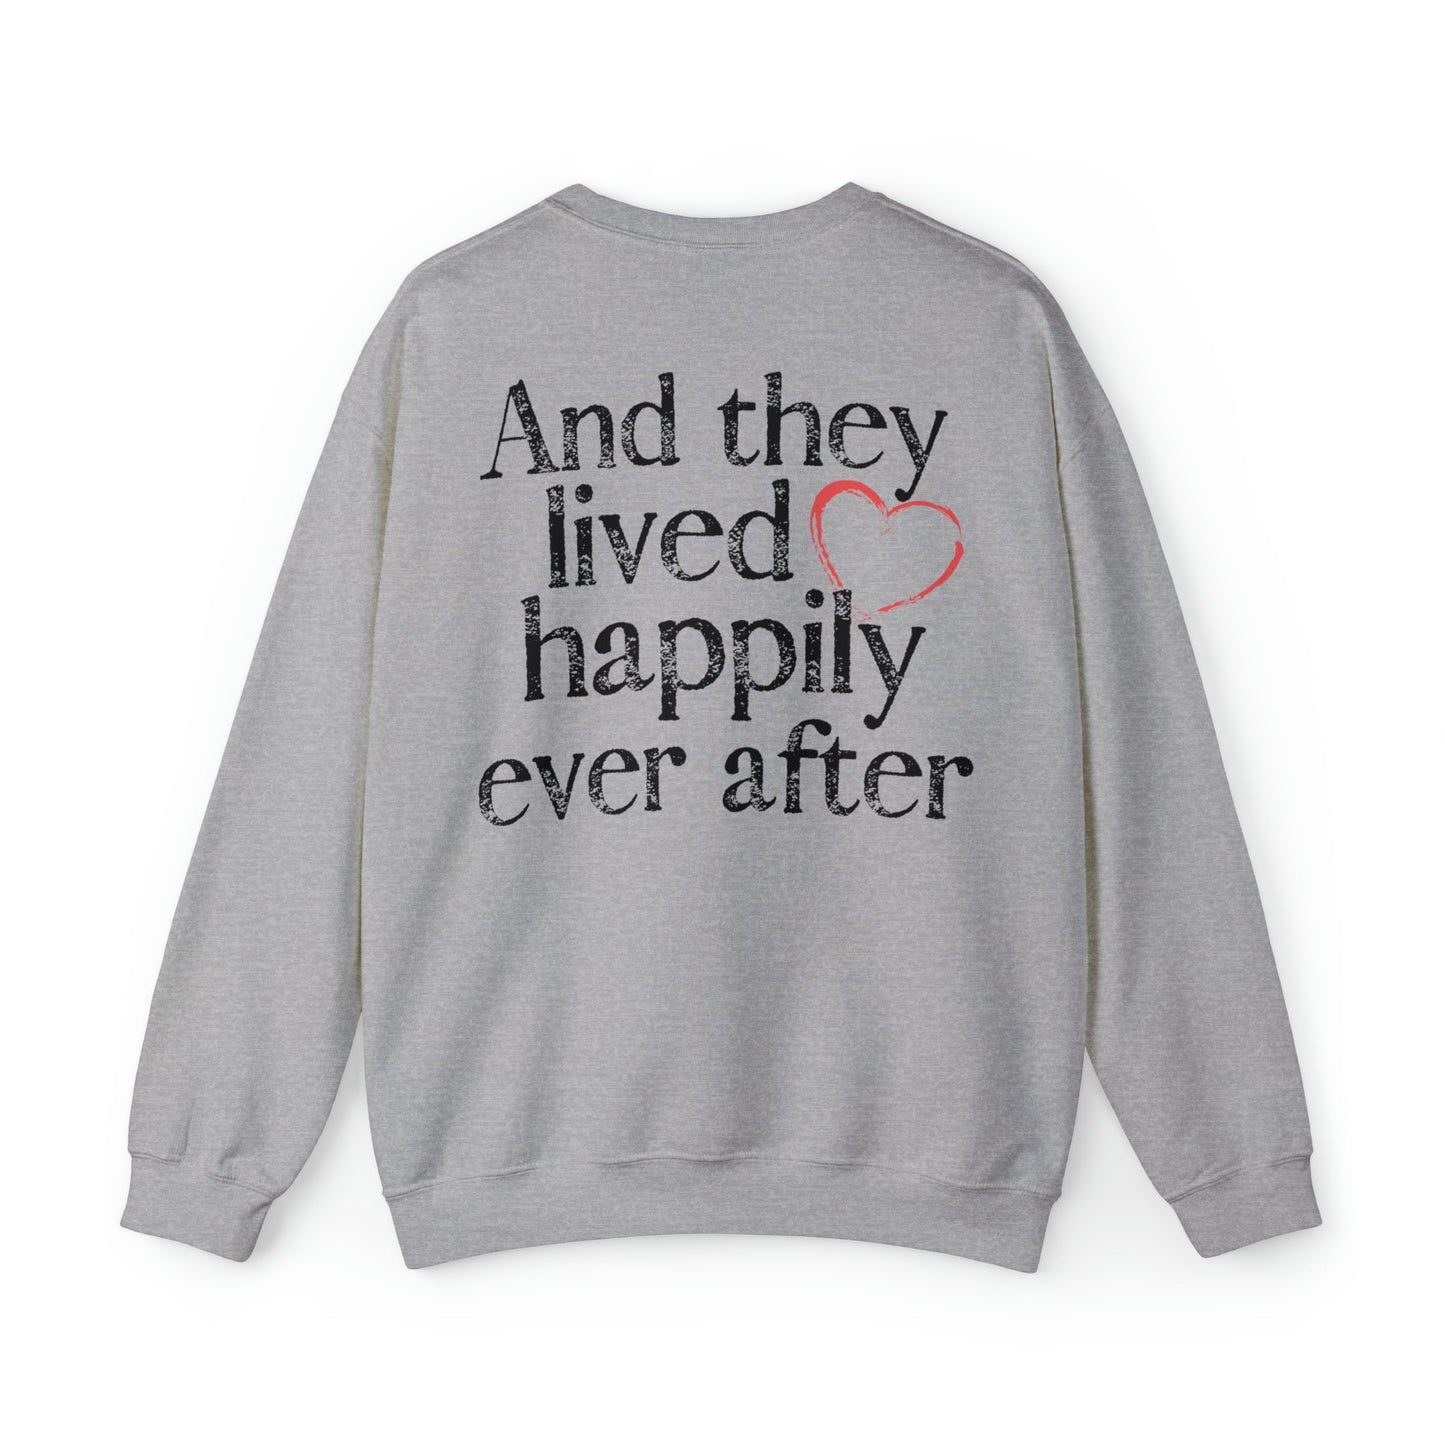 And They Lived Happily Ever After Sweatshirt, Back Design, Honeymoon Outfit, Bride Gift, Shirt For Photos, Cute Hoodie Fiancé Engaged - lemonanddot